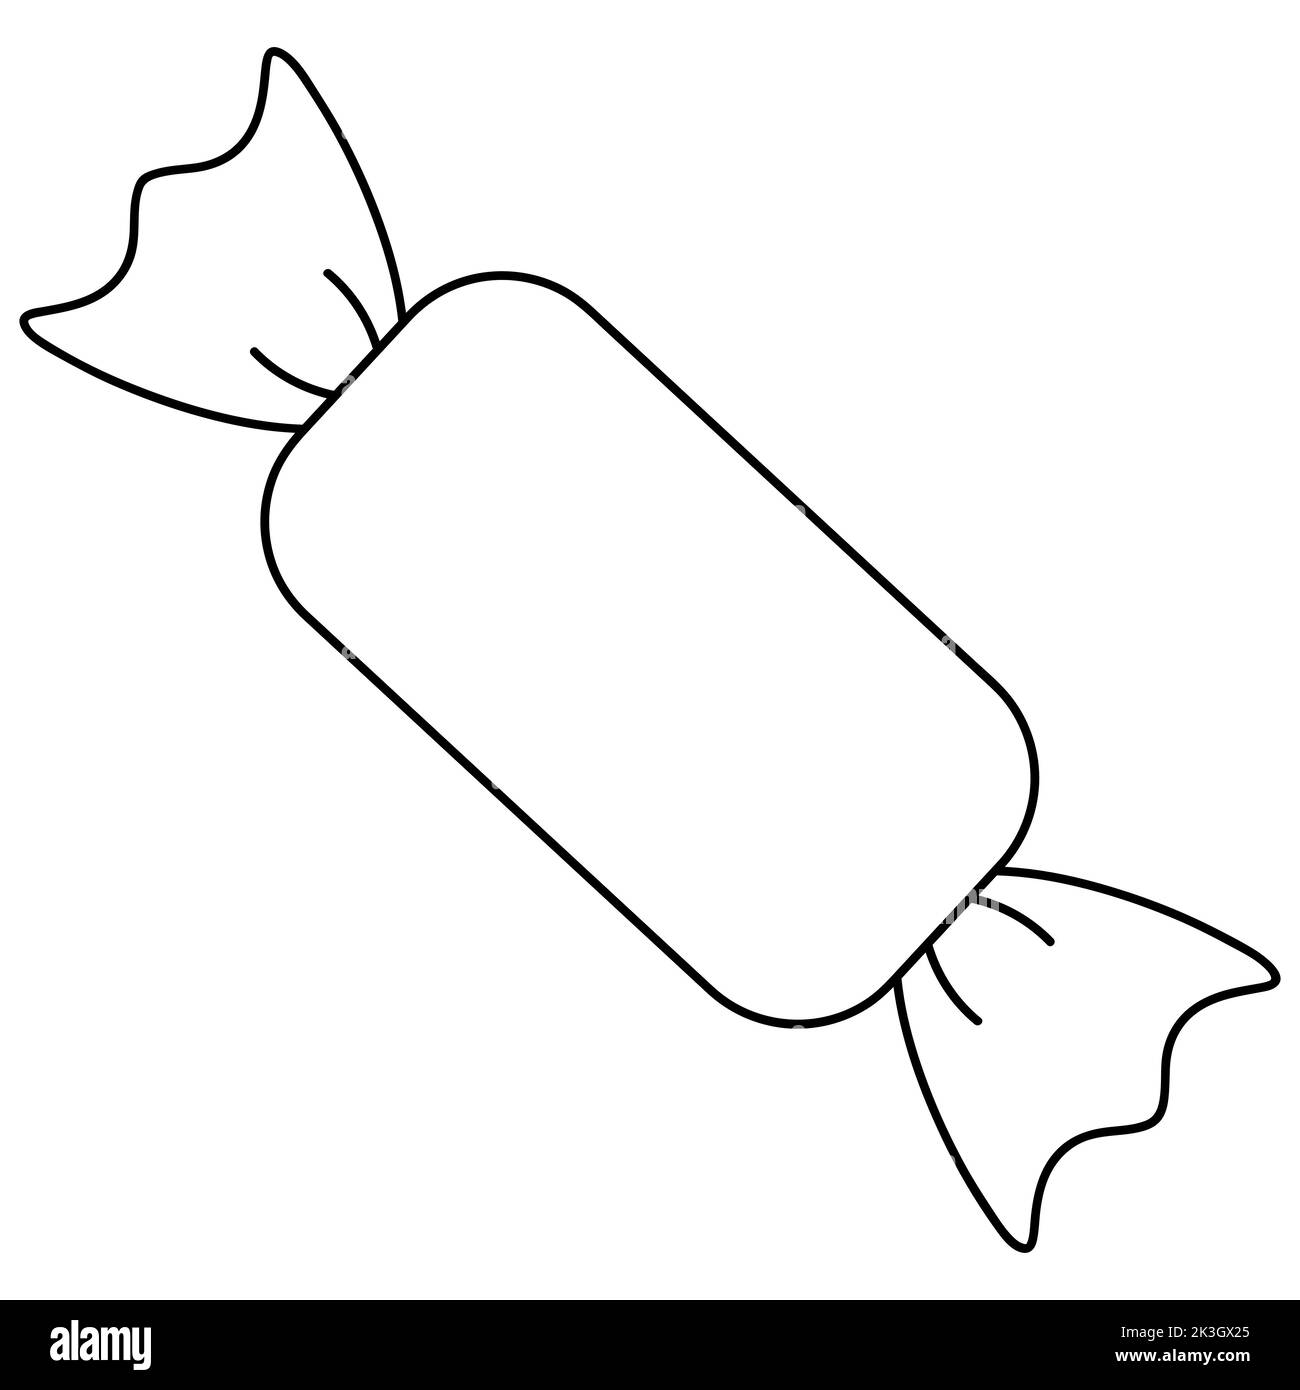 wrapped candy clipart black and white